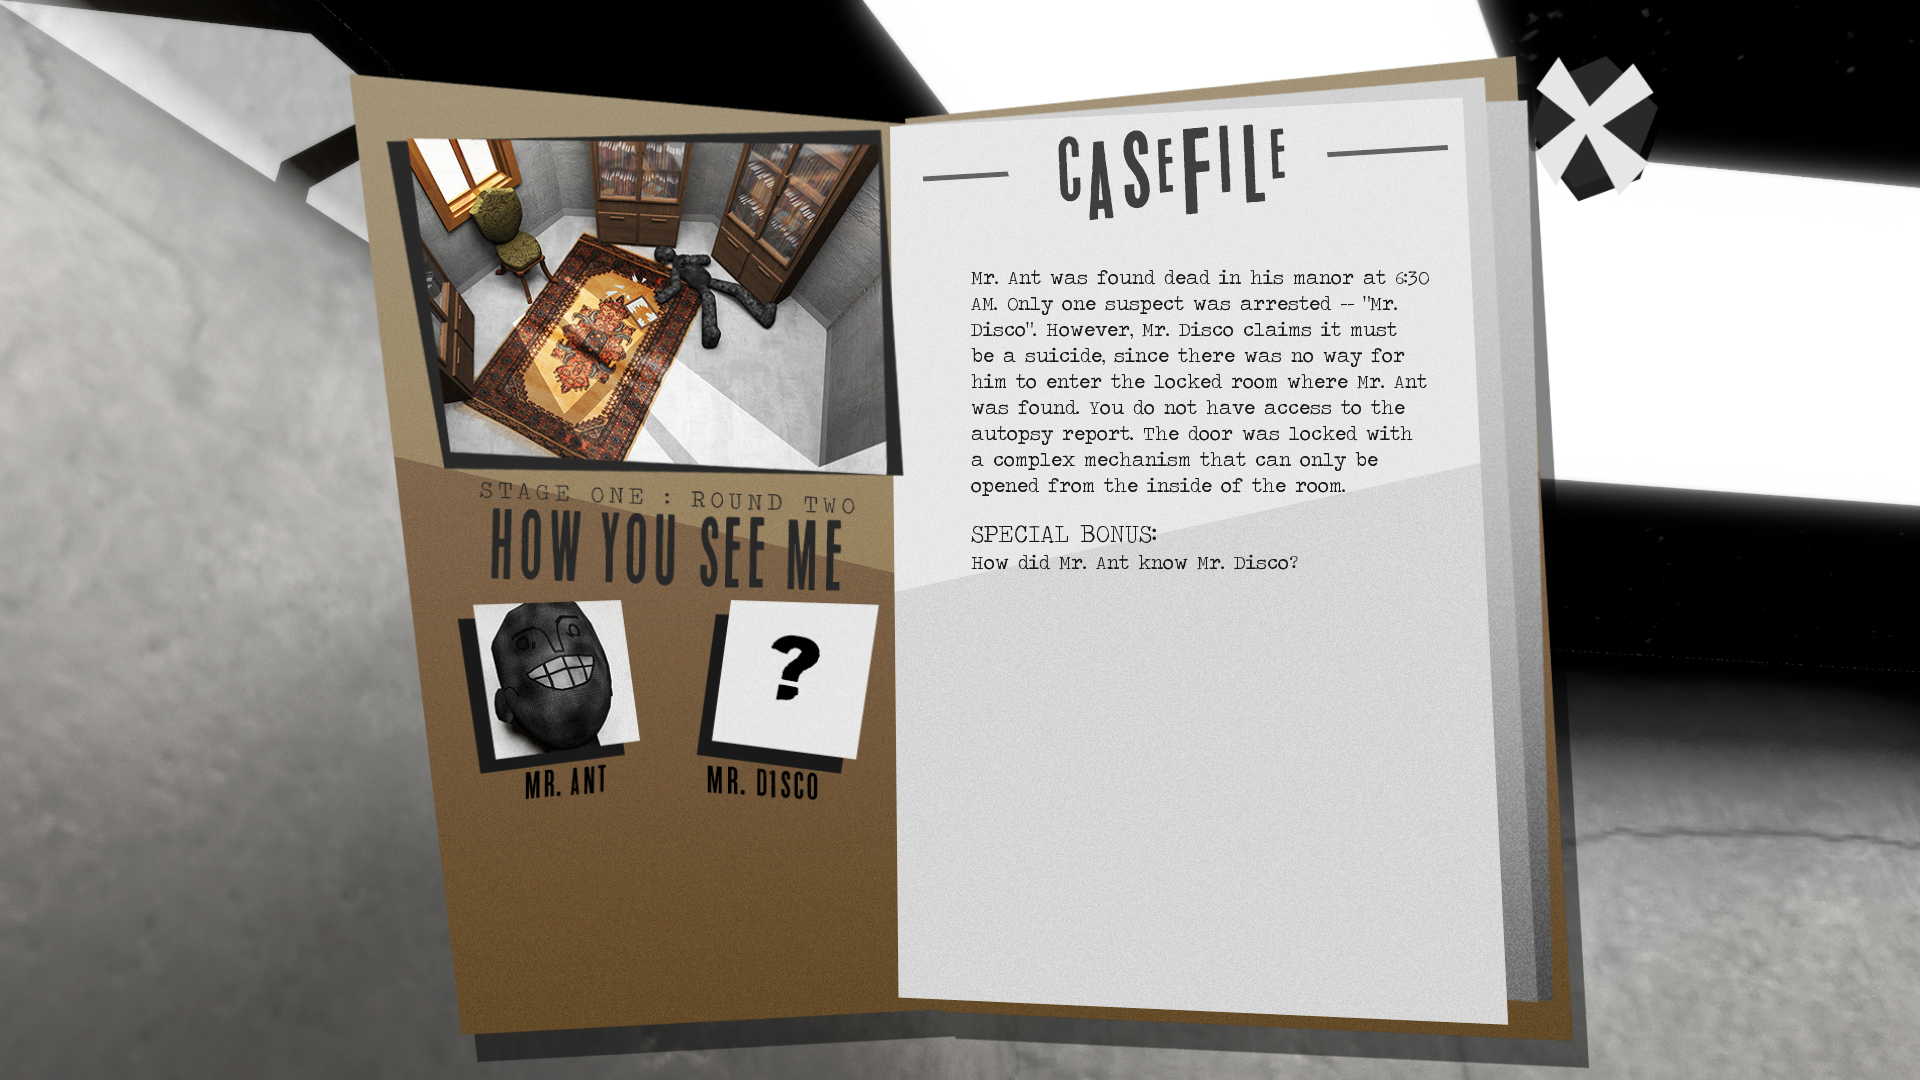 Methods: Detective Competition screenshot game